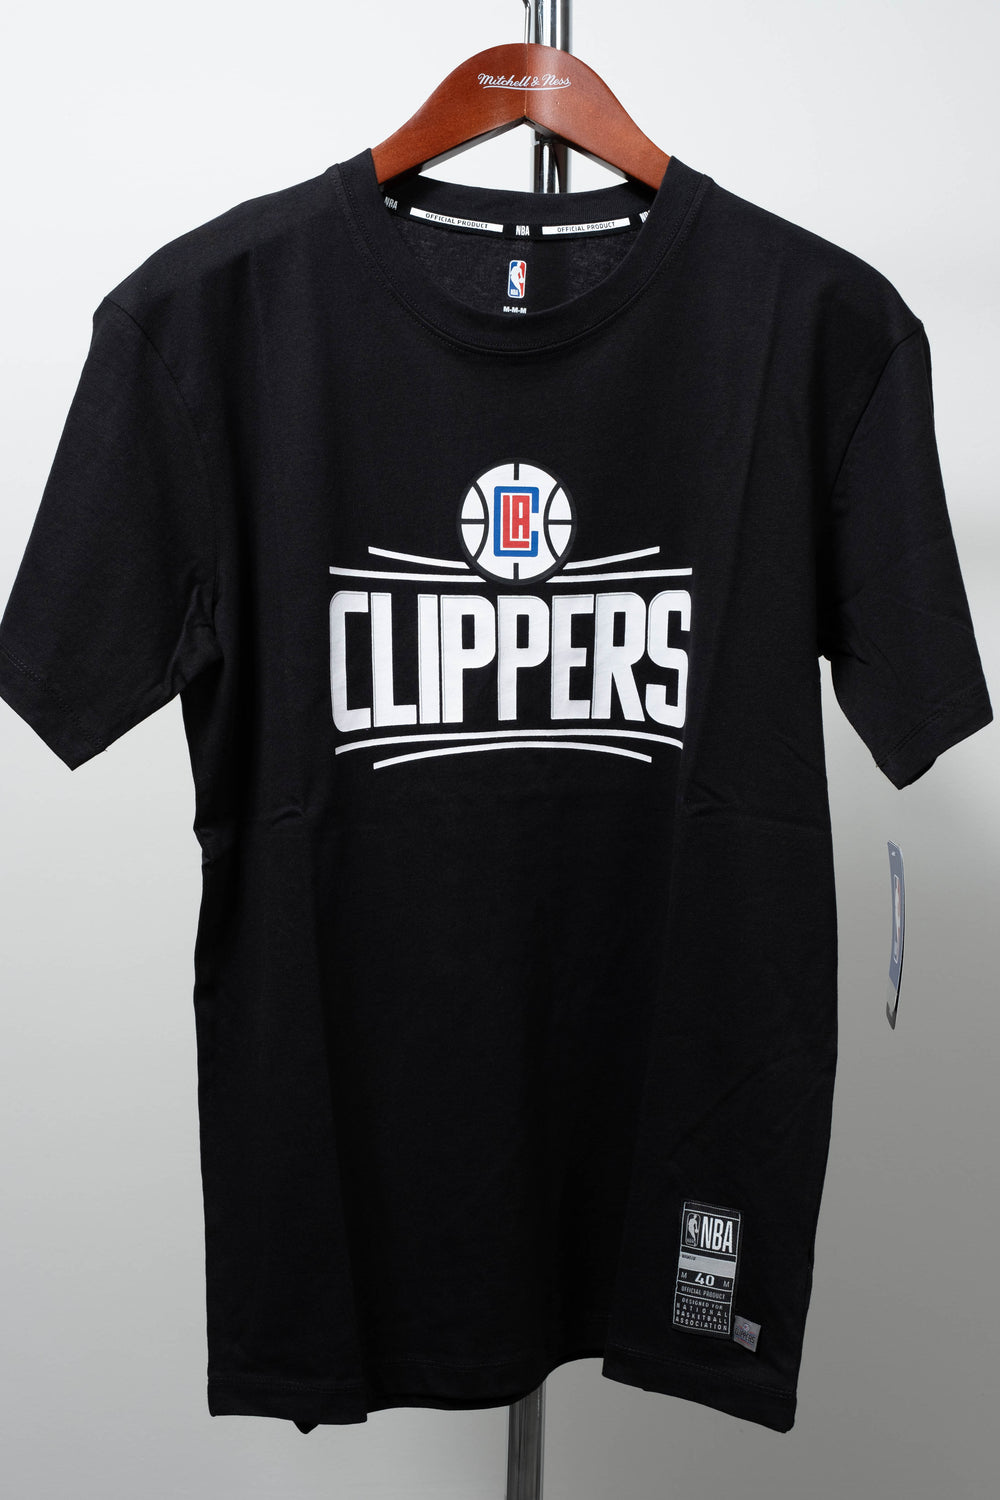 L.A CLIPPERS